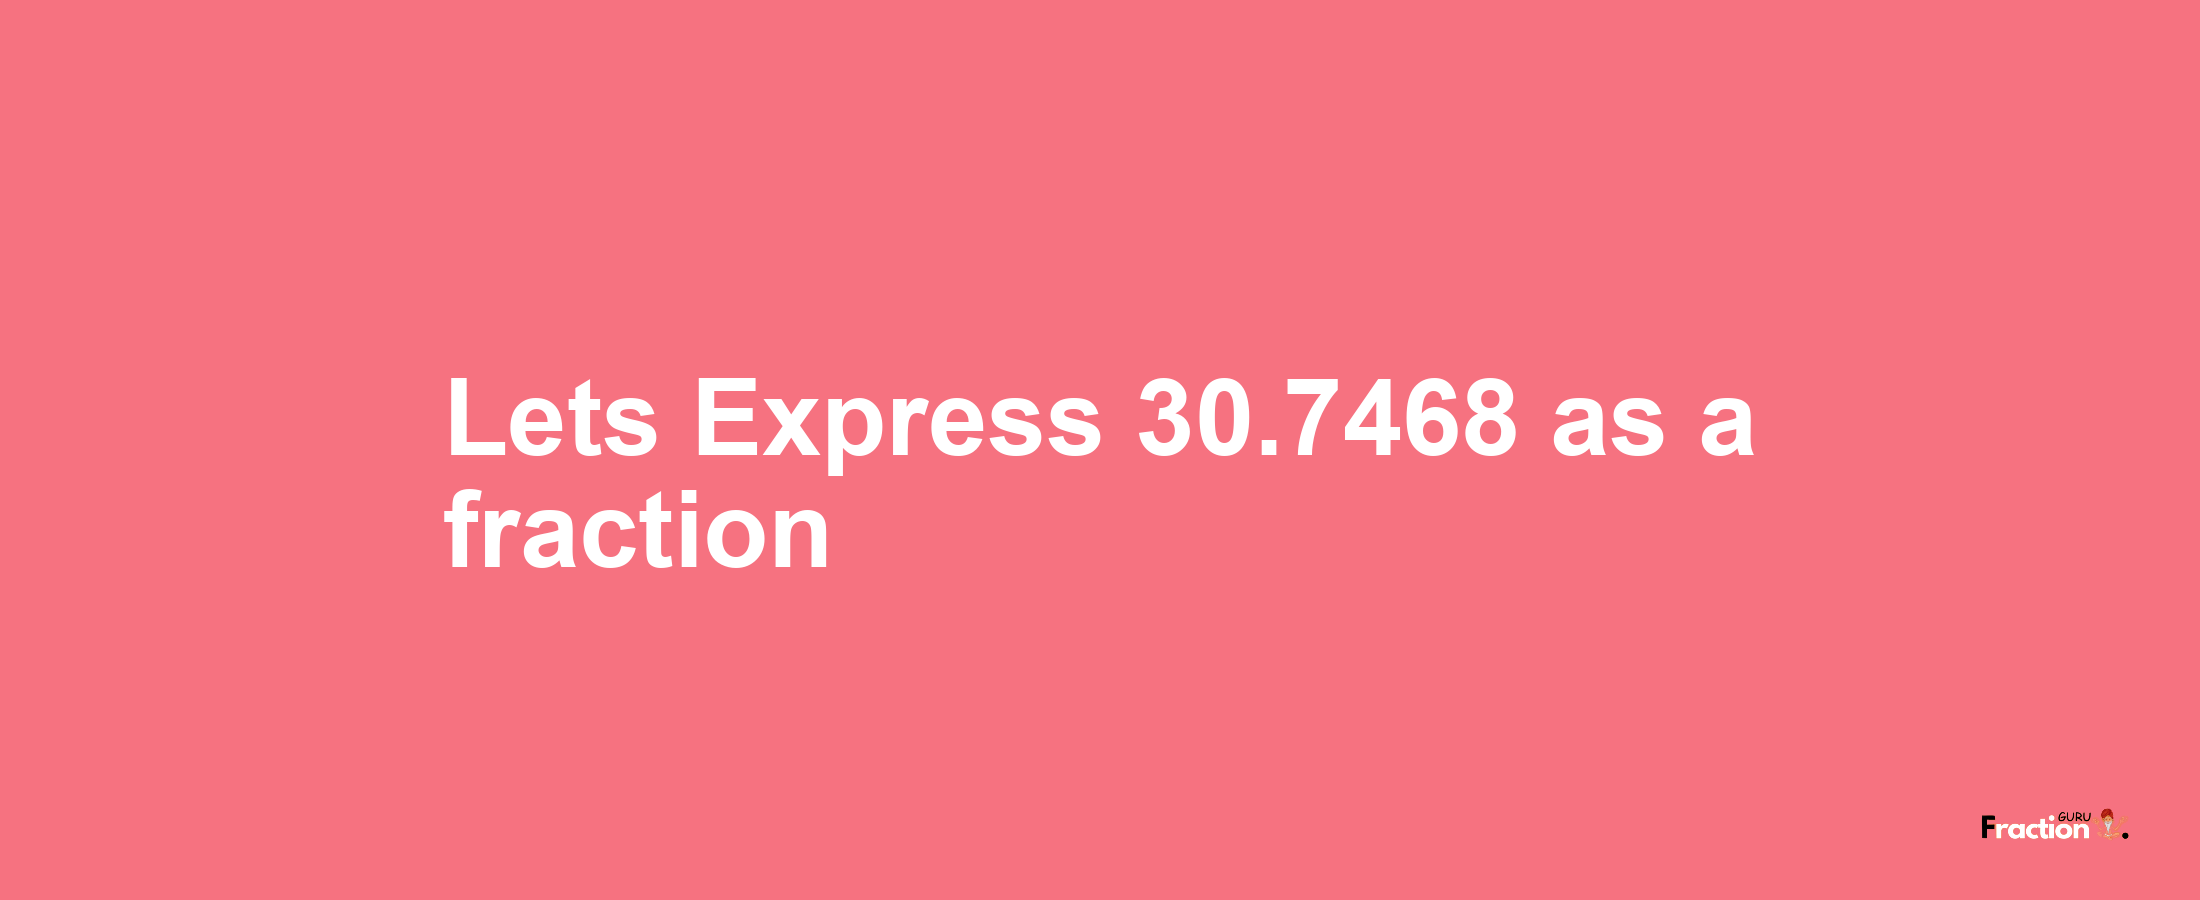 Lets Express 30.7468 as afraction